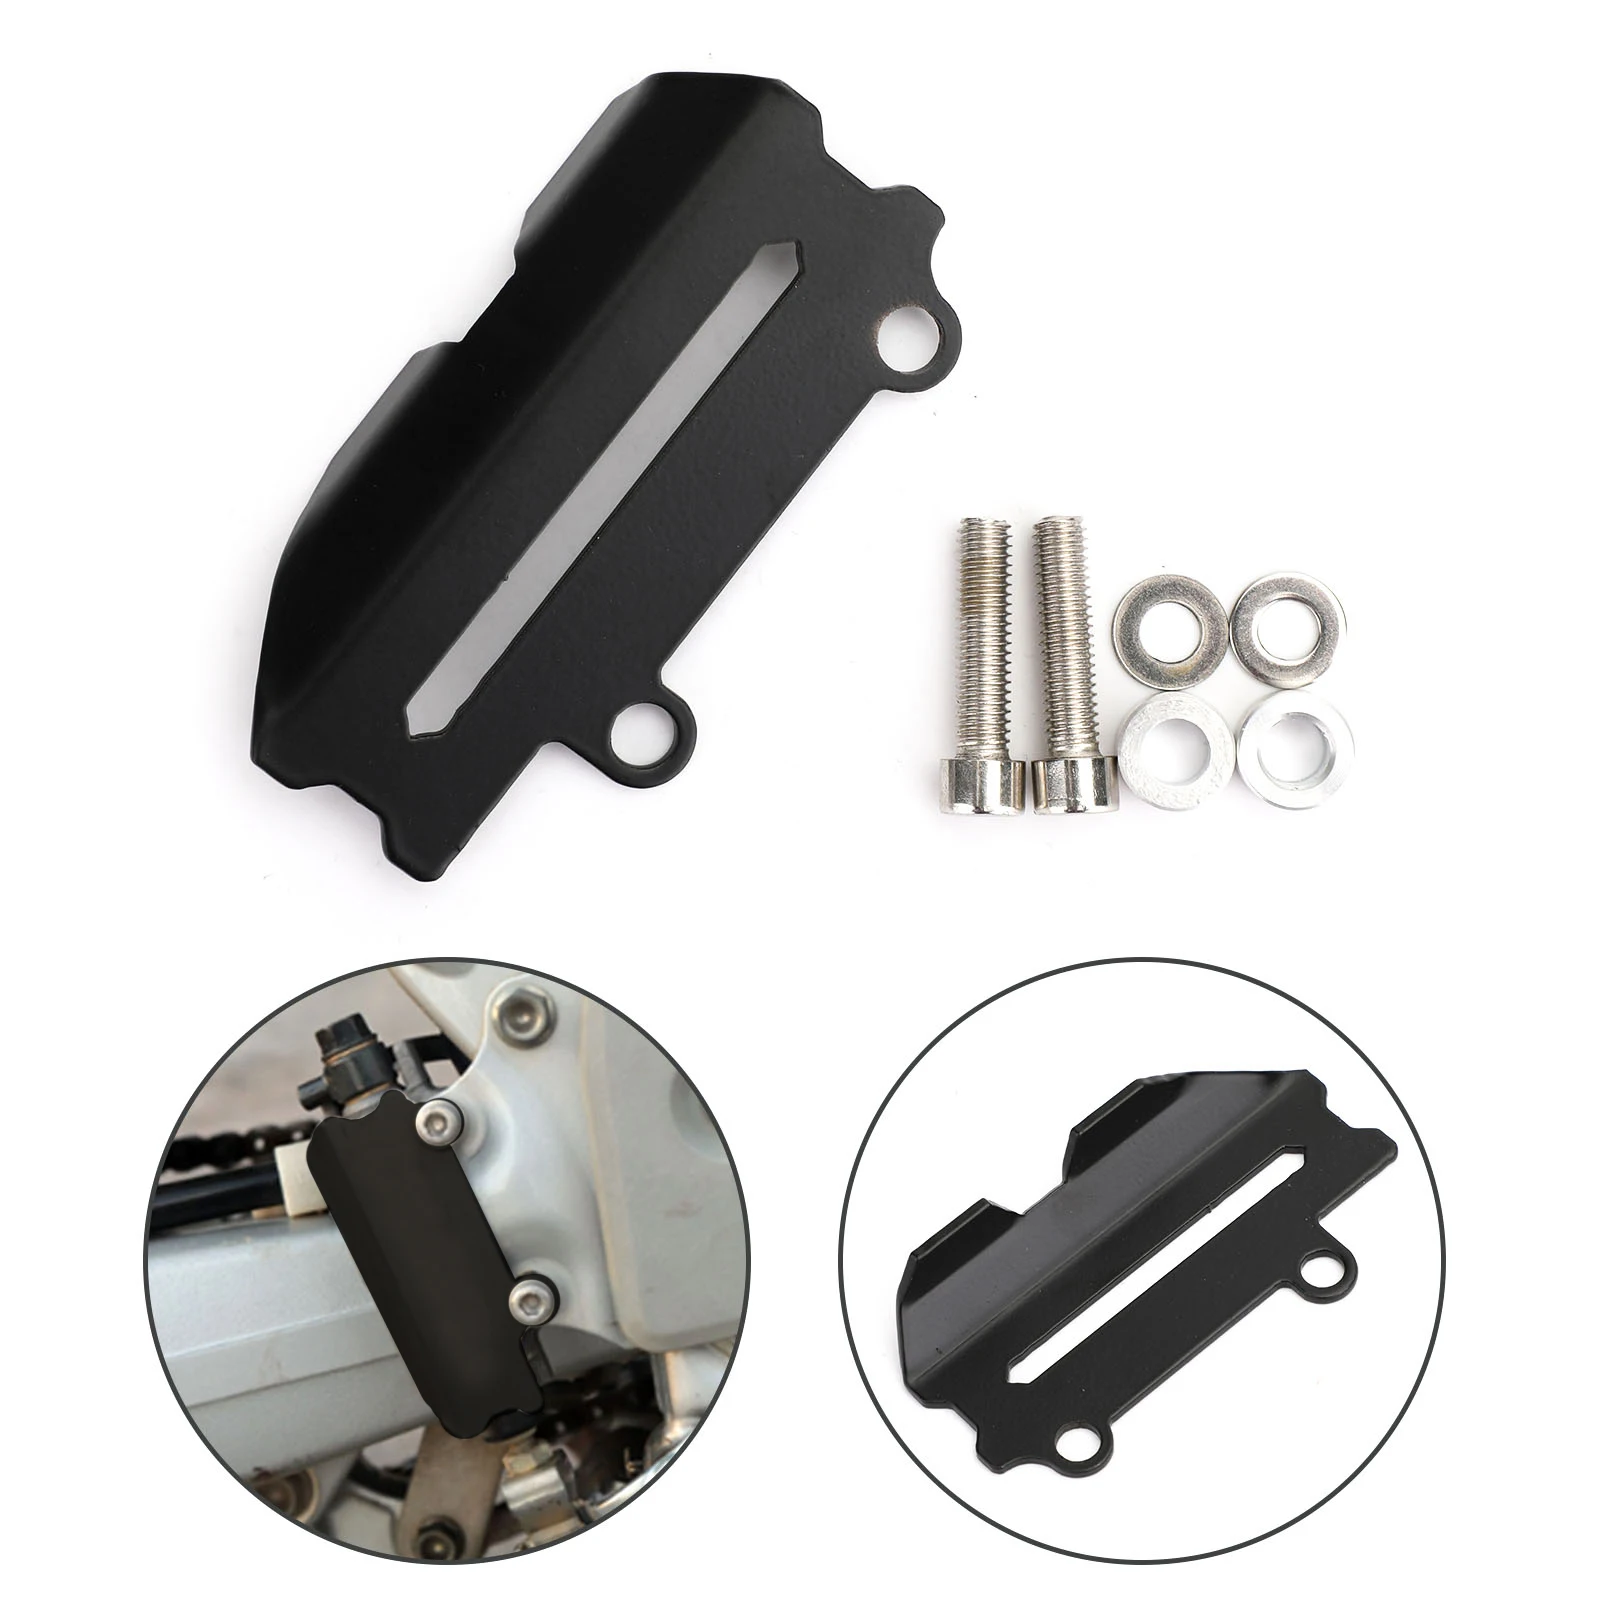 

Artudatech Rear Brake Master Cylinder Protector Cover for Honda CRF250L CRF250M CRF250 CRF 250 Rally 250l 250m 2012-2019